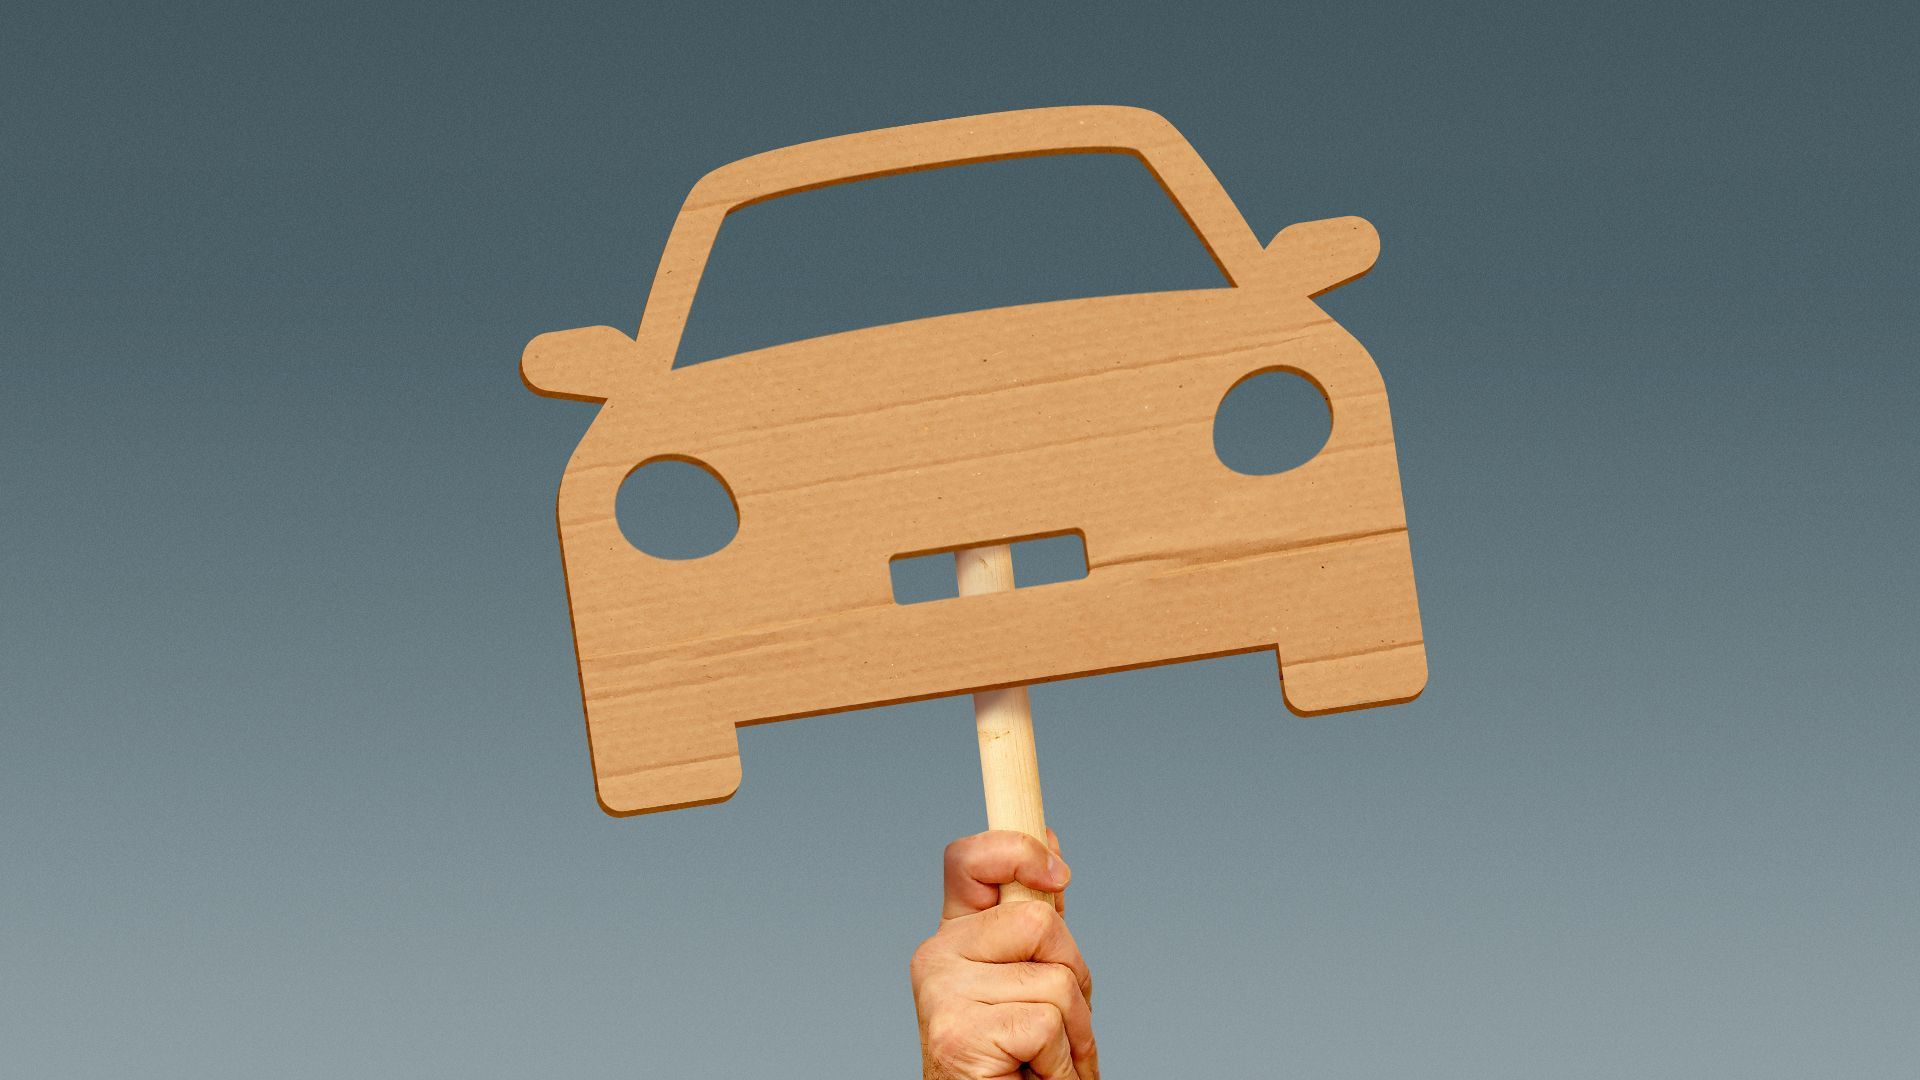 Illustration of a hand holding a strike protest sign with the cardboard cut in the shape of a car